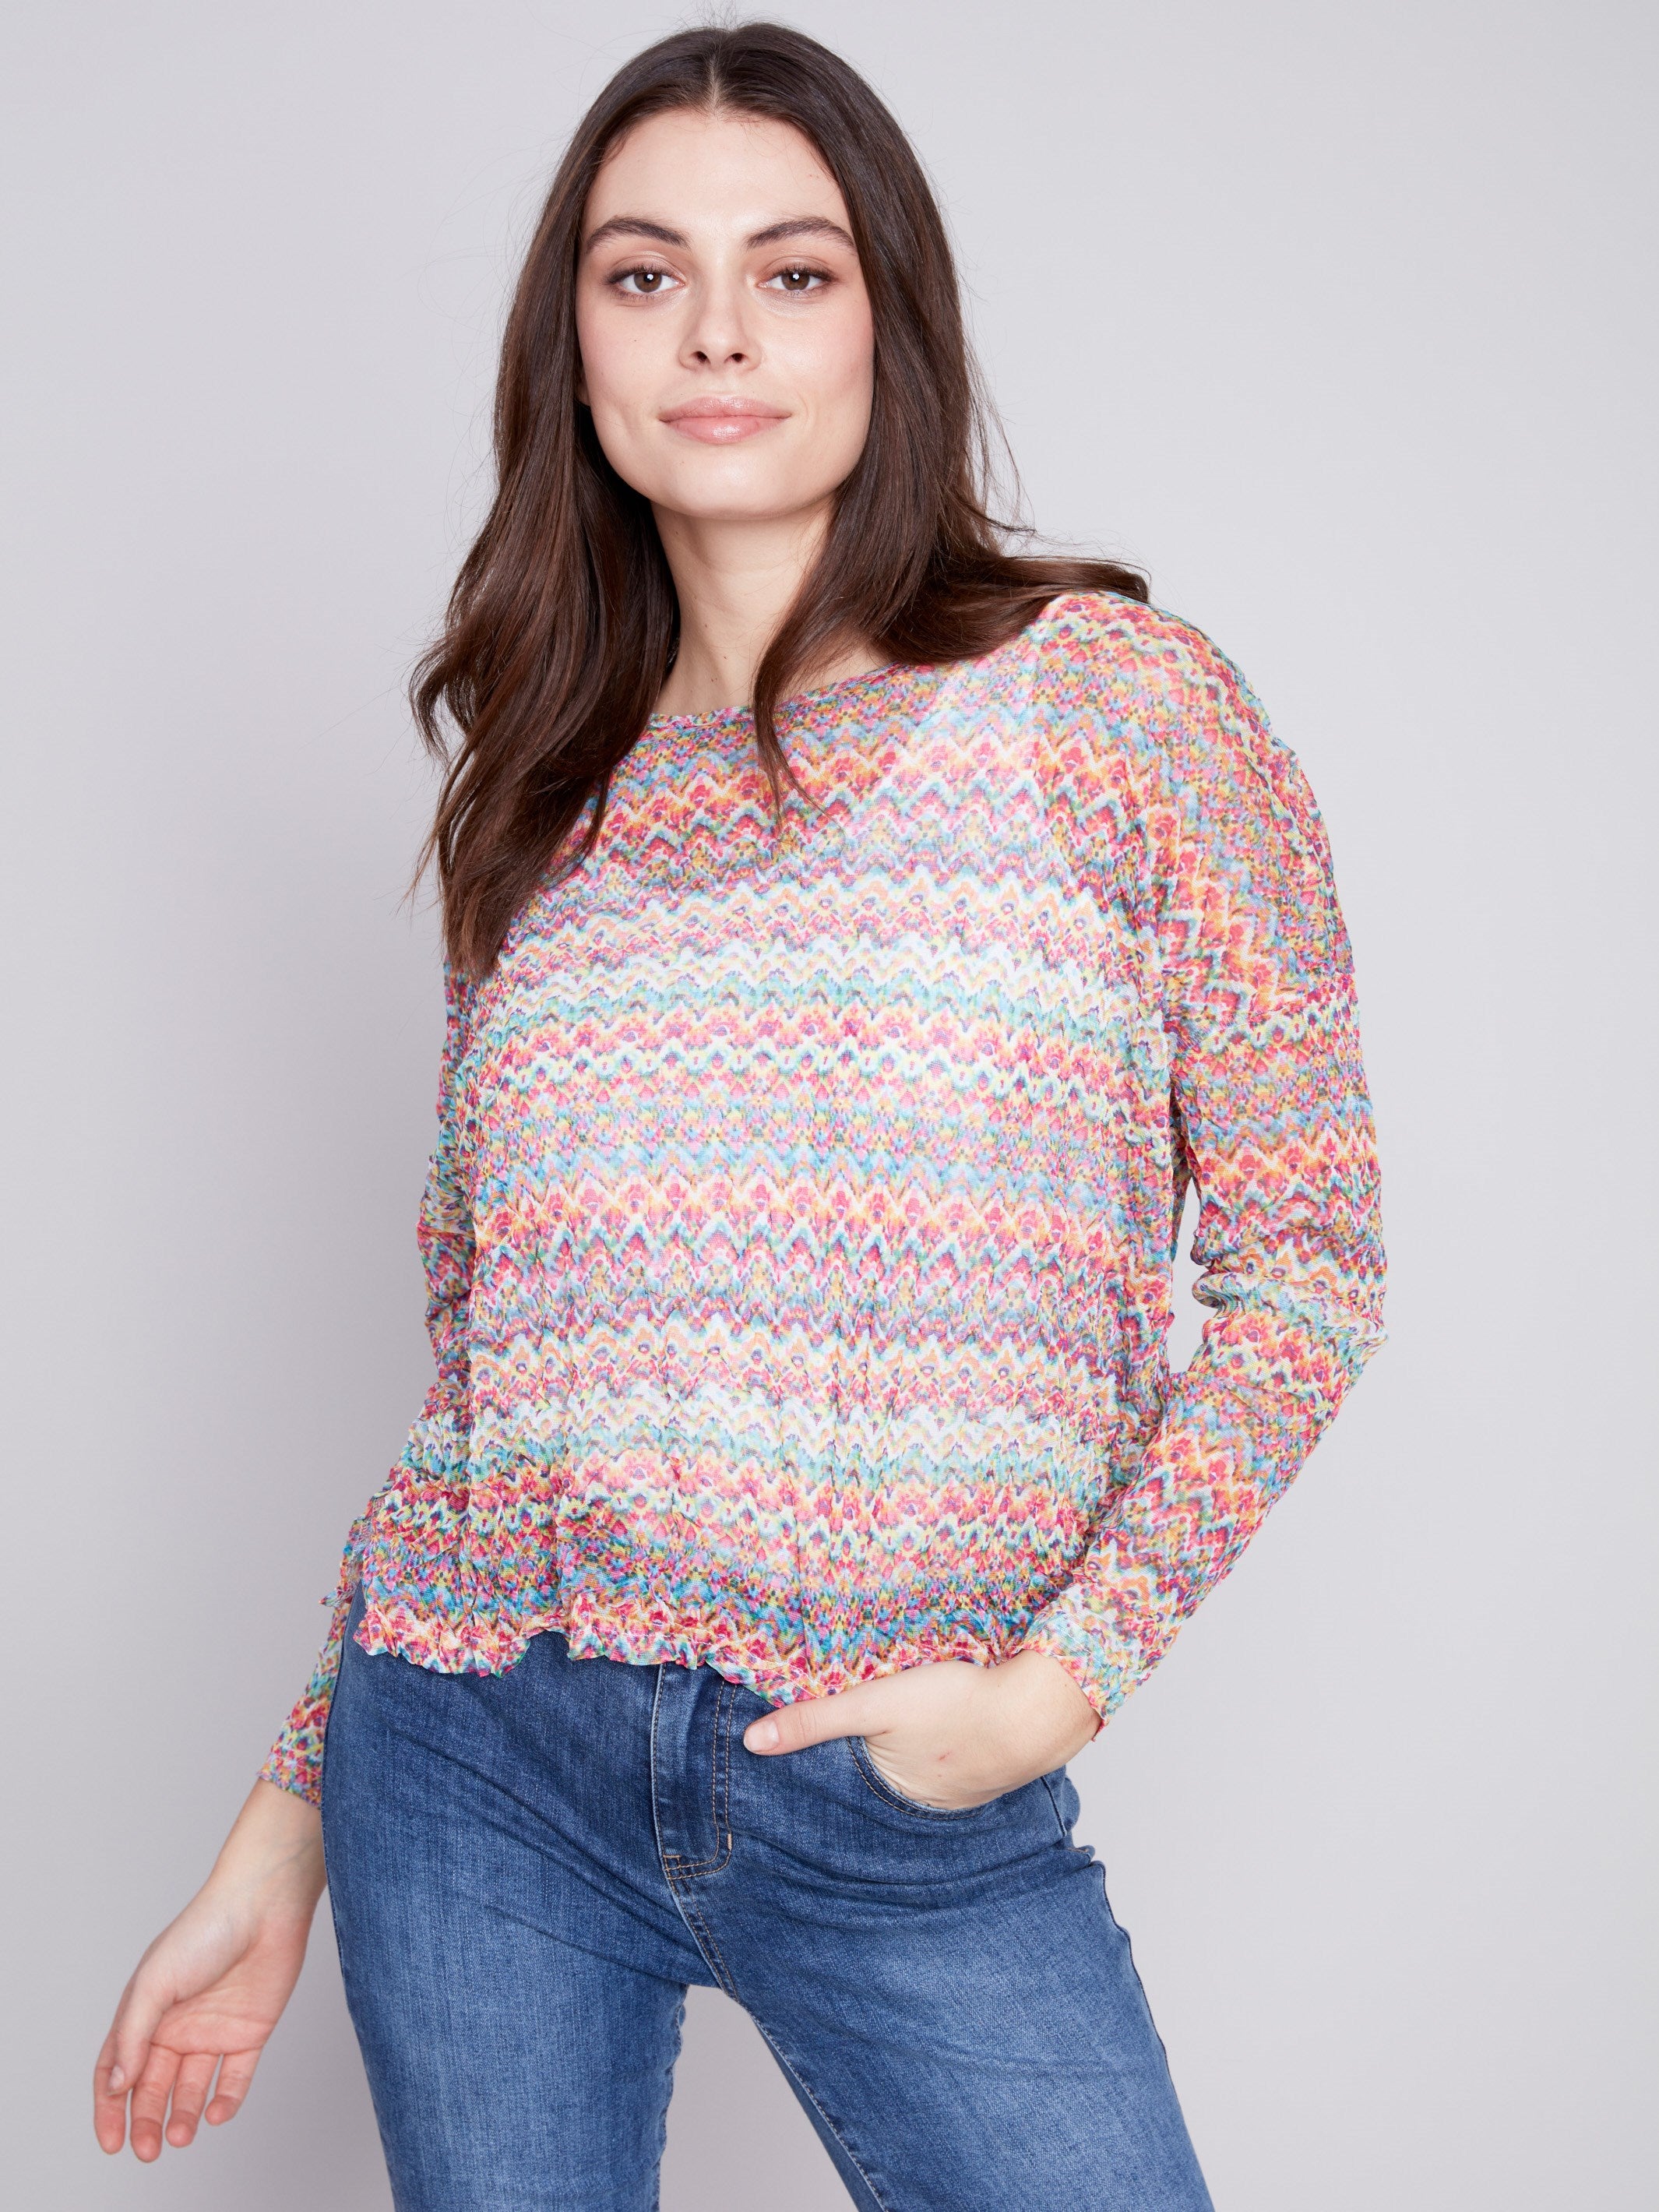 Printed Crinkle Mesh Top - Multicolor - Charlie B Collection Canada - Image 1